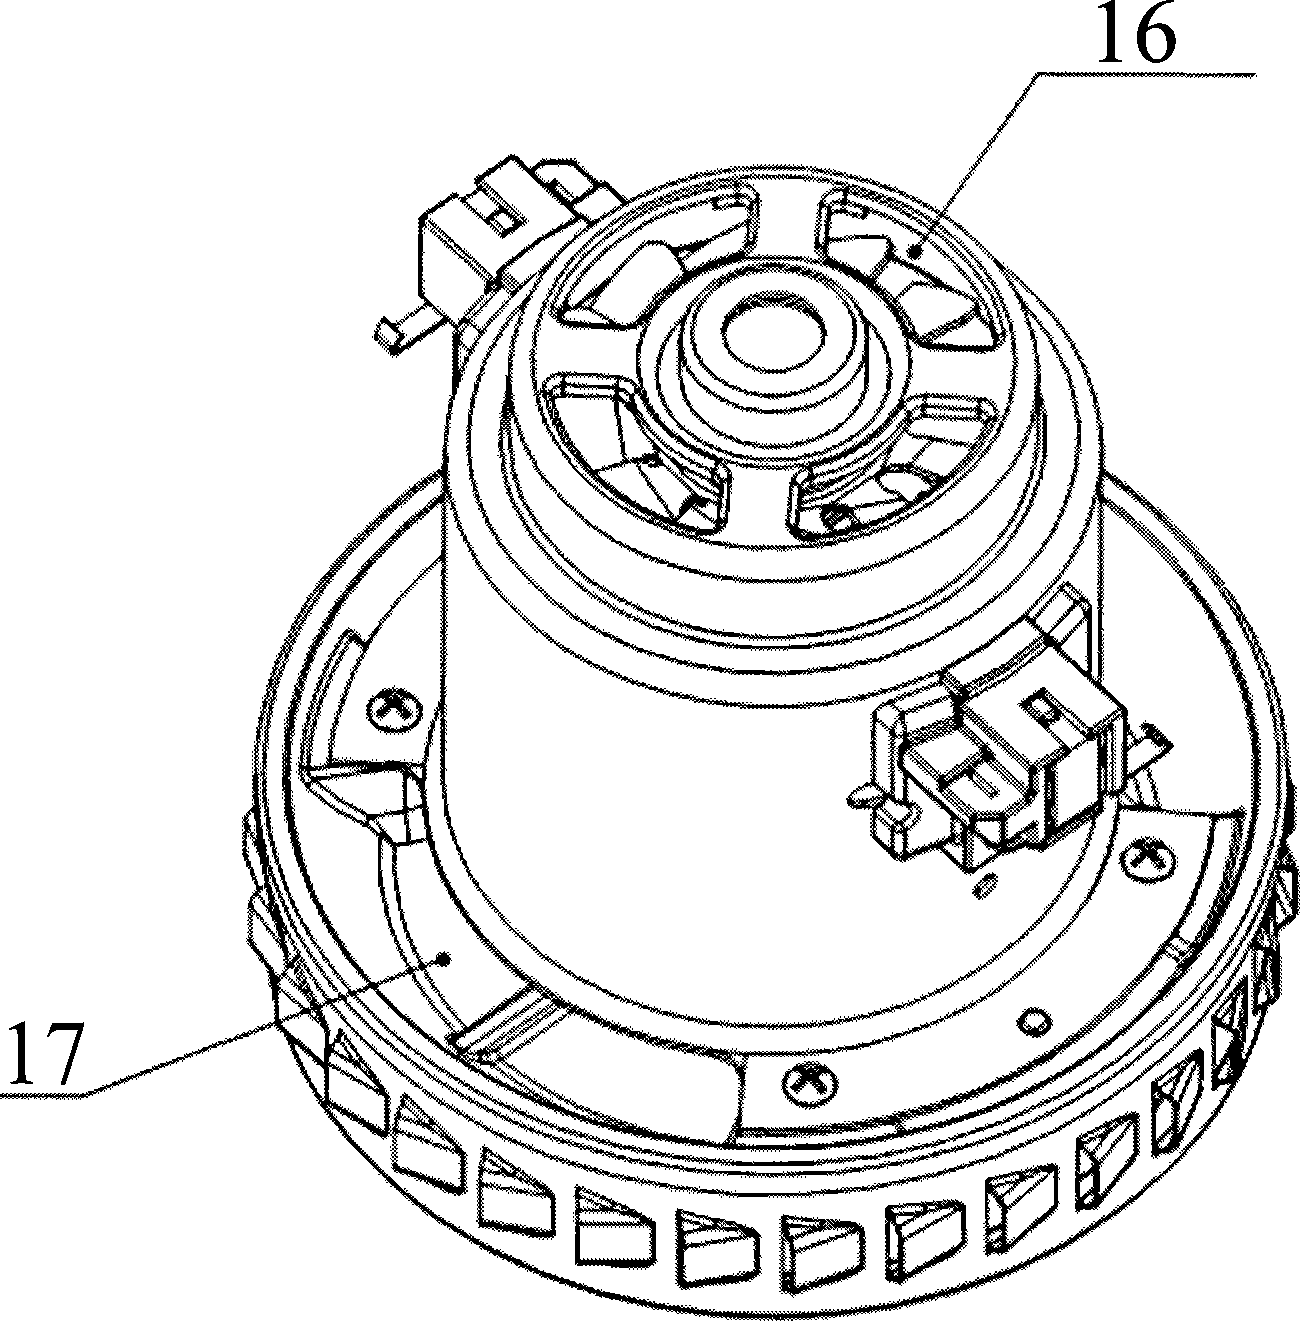 Motor for dust collector